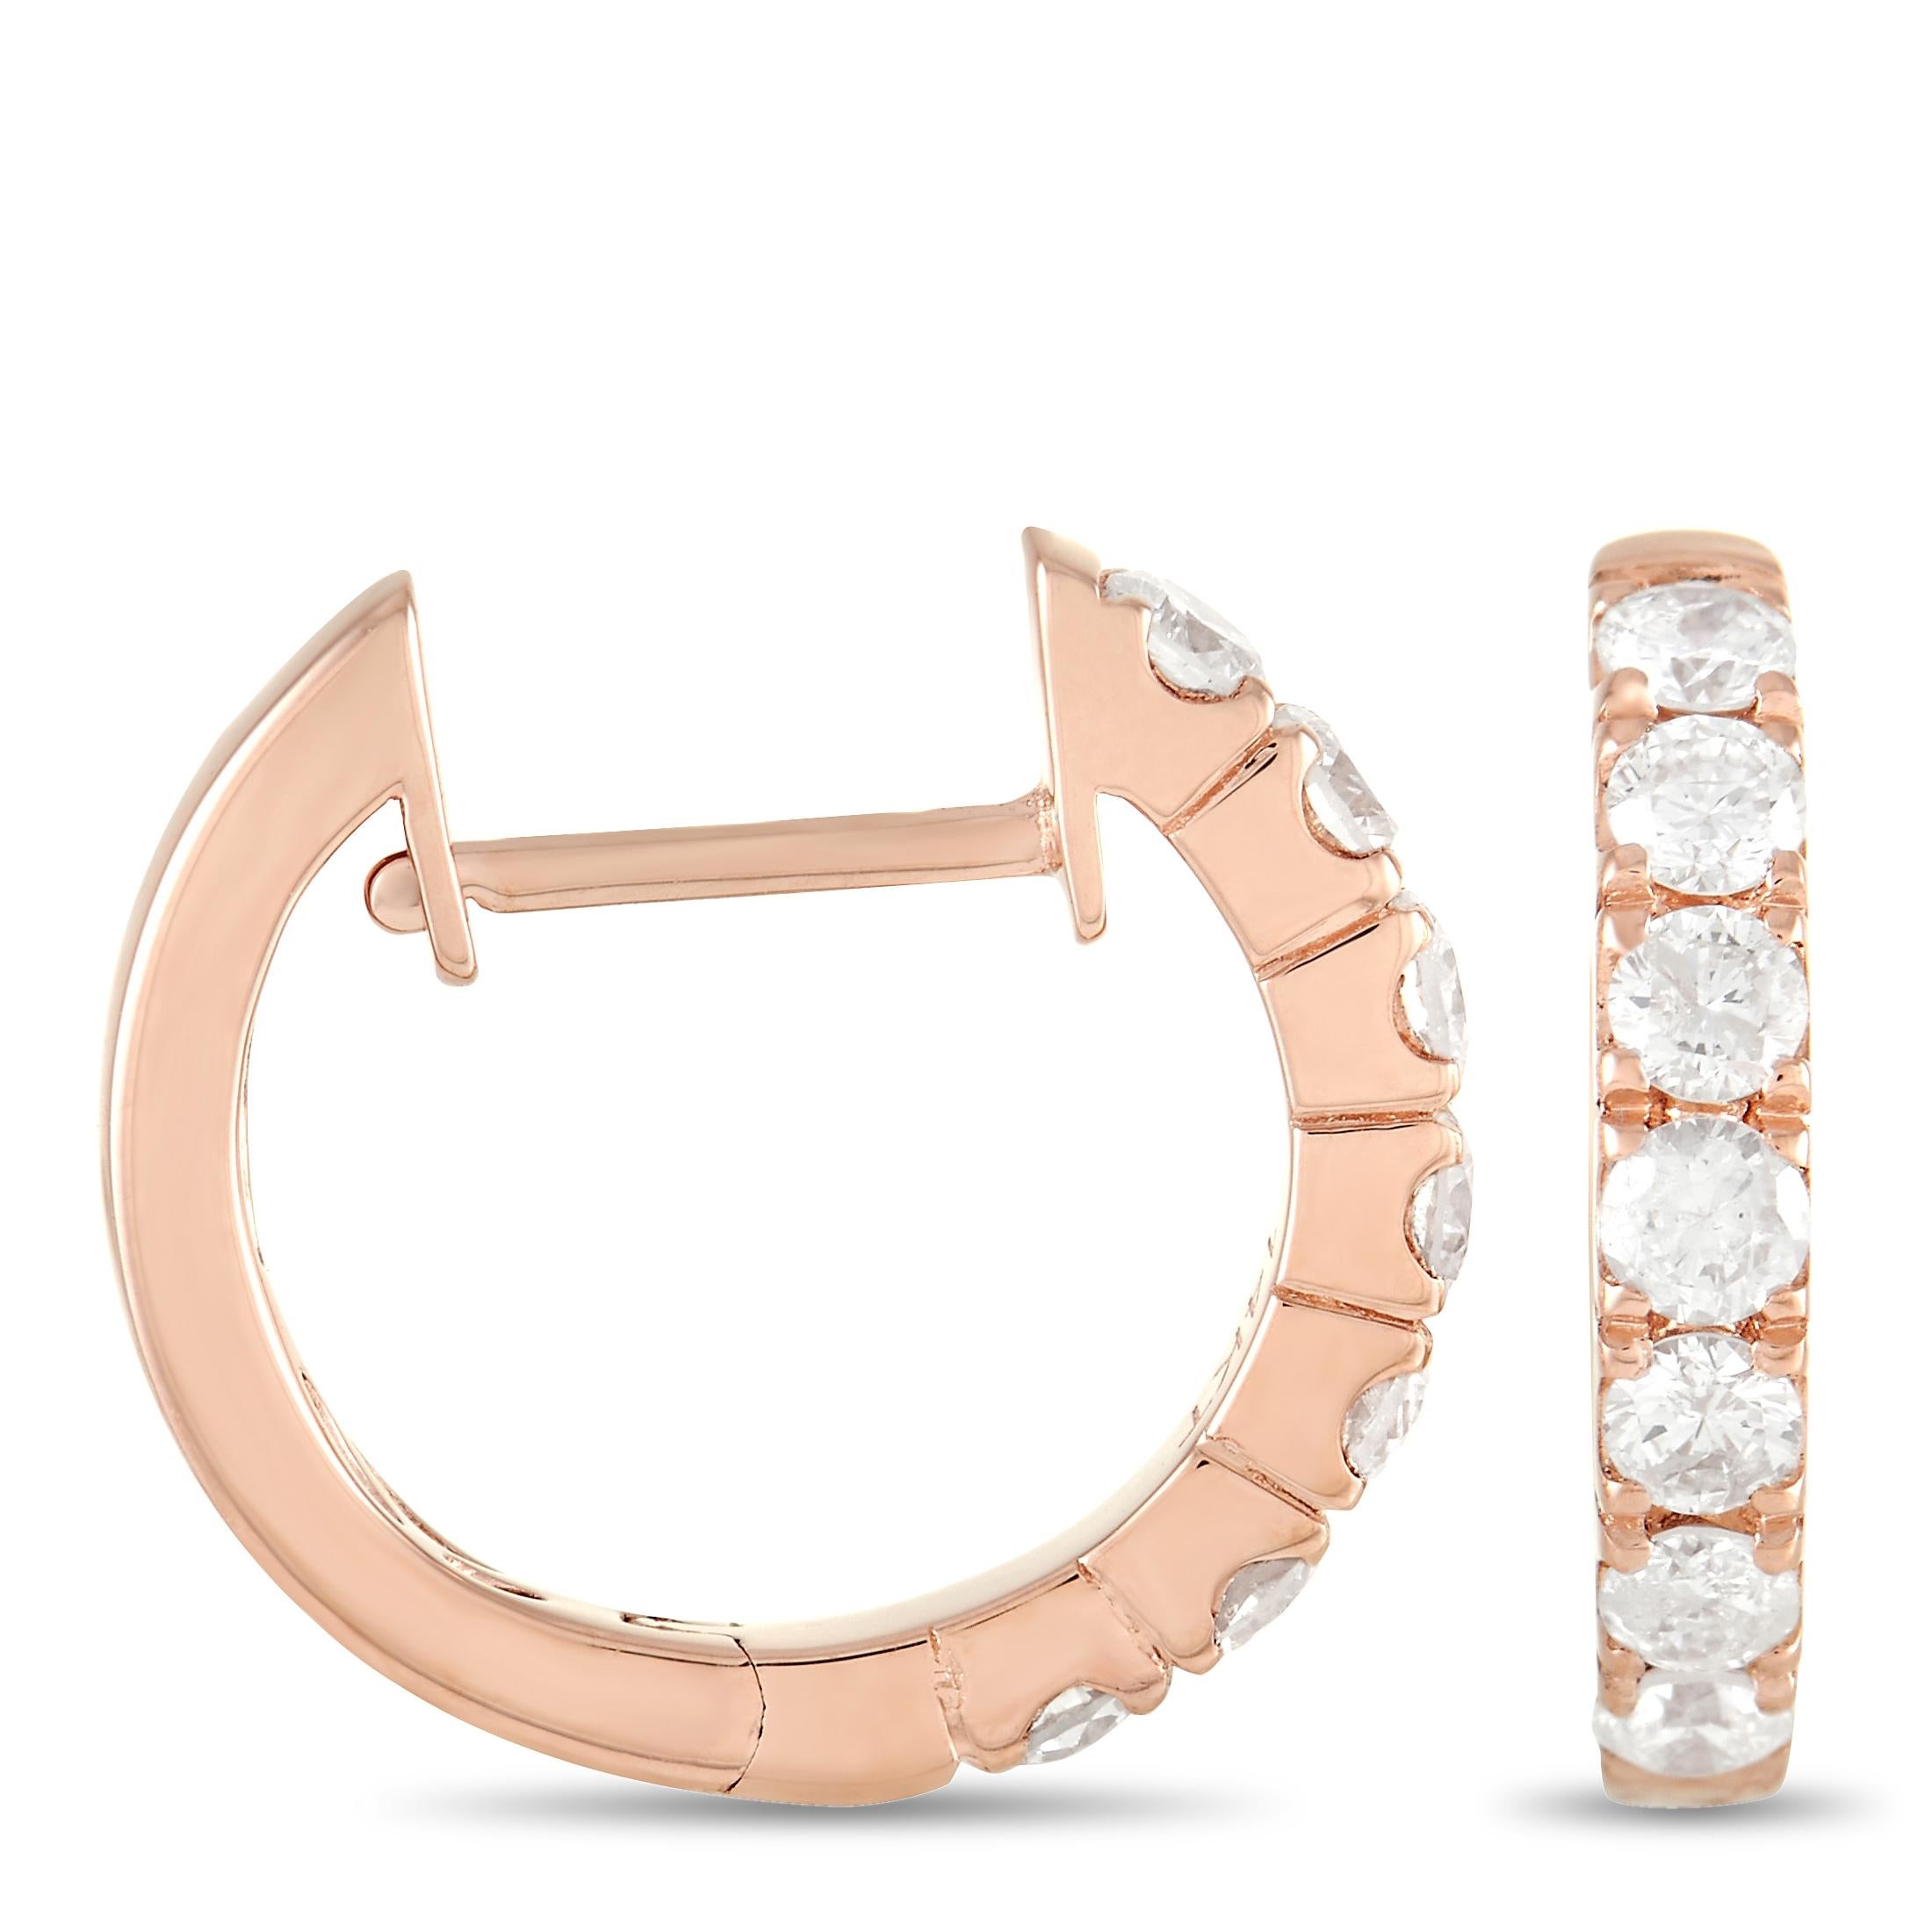 Bold, breathtaking round-cut diamonds totaling 0.59 carats add elegance to these charming hoop earrings. Each one measures .5” round and includes a stylish 14K Rose Gold setting. 
 
 This jewelry piece is offered in brand new condition and